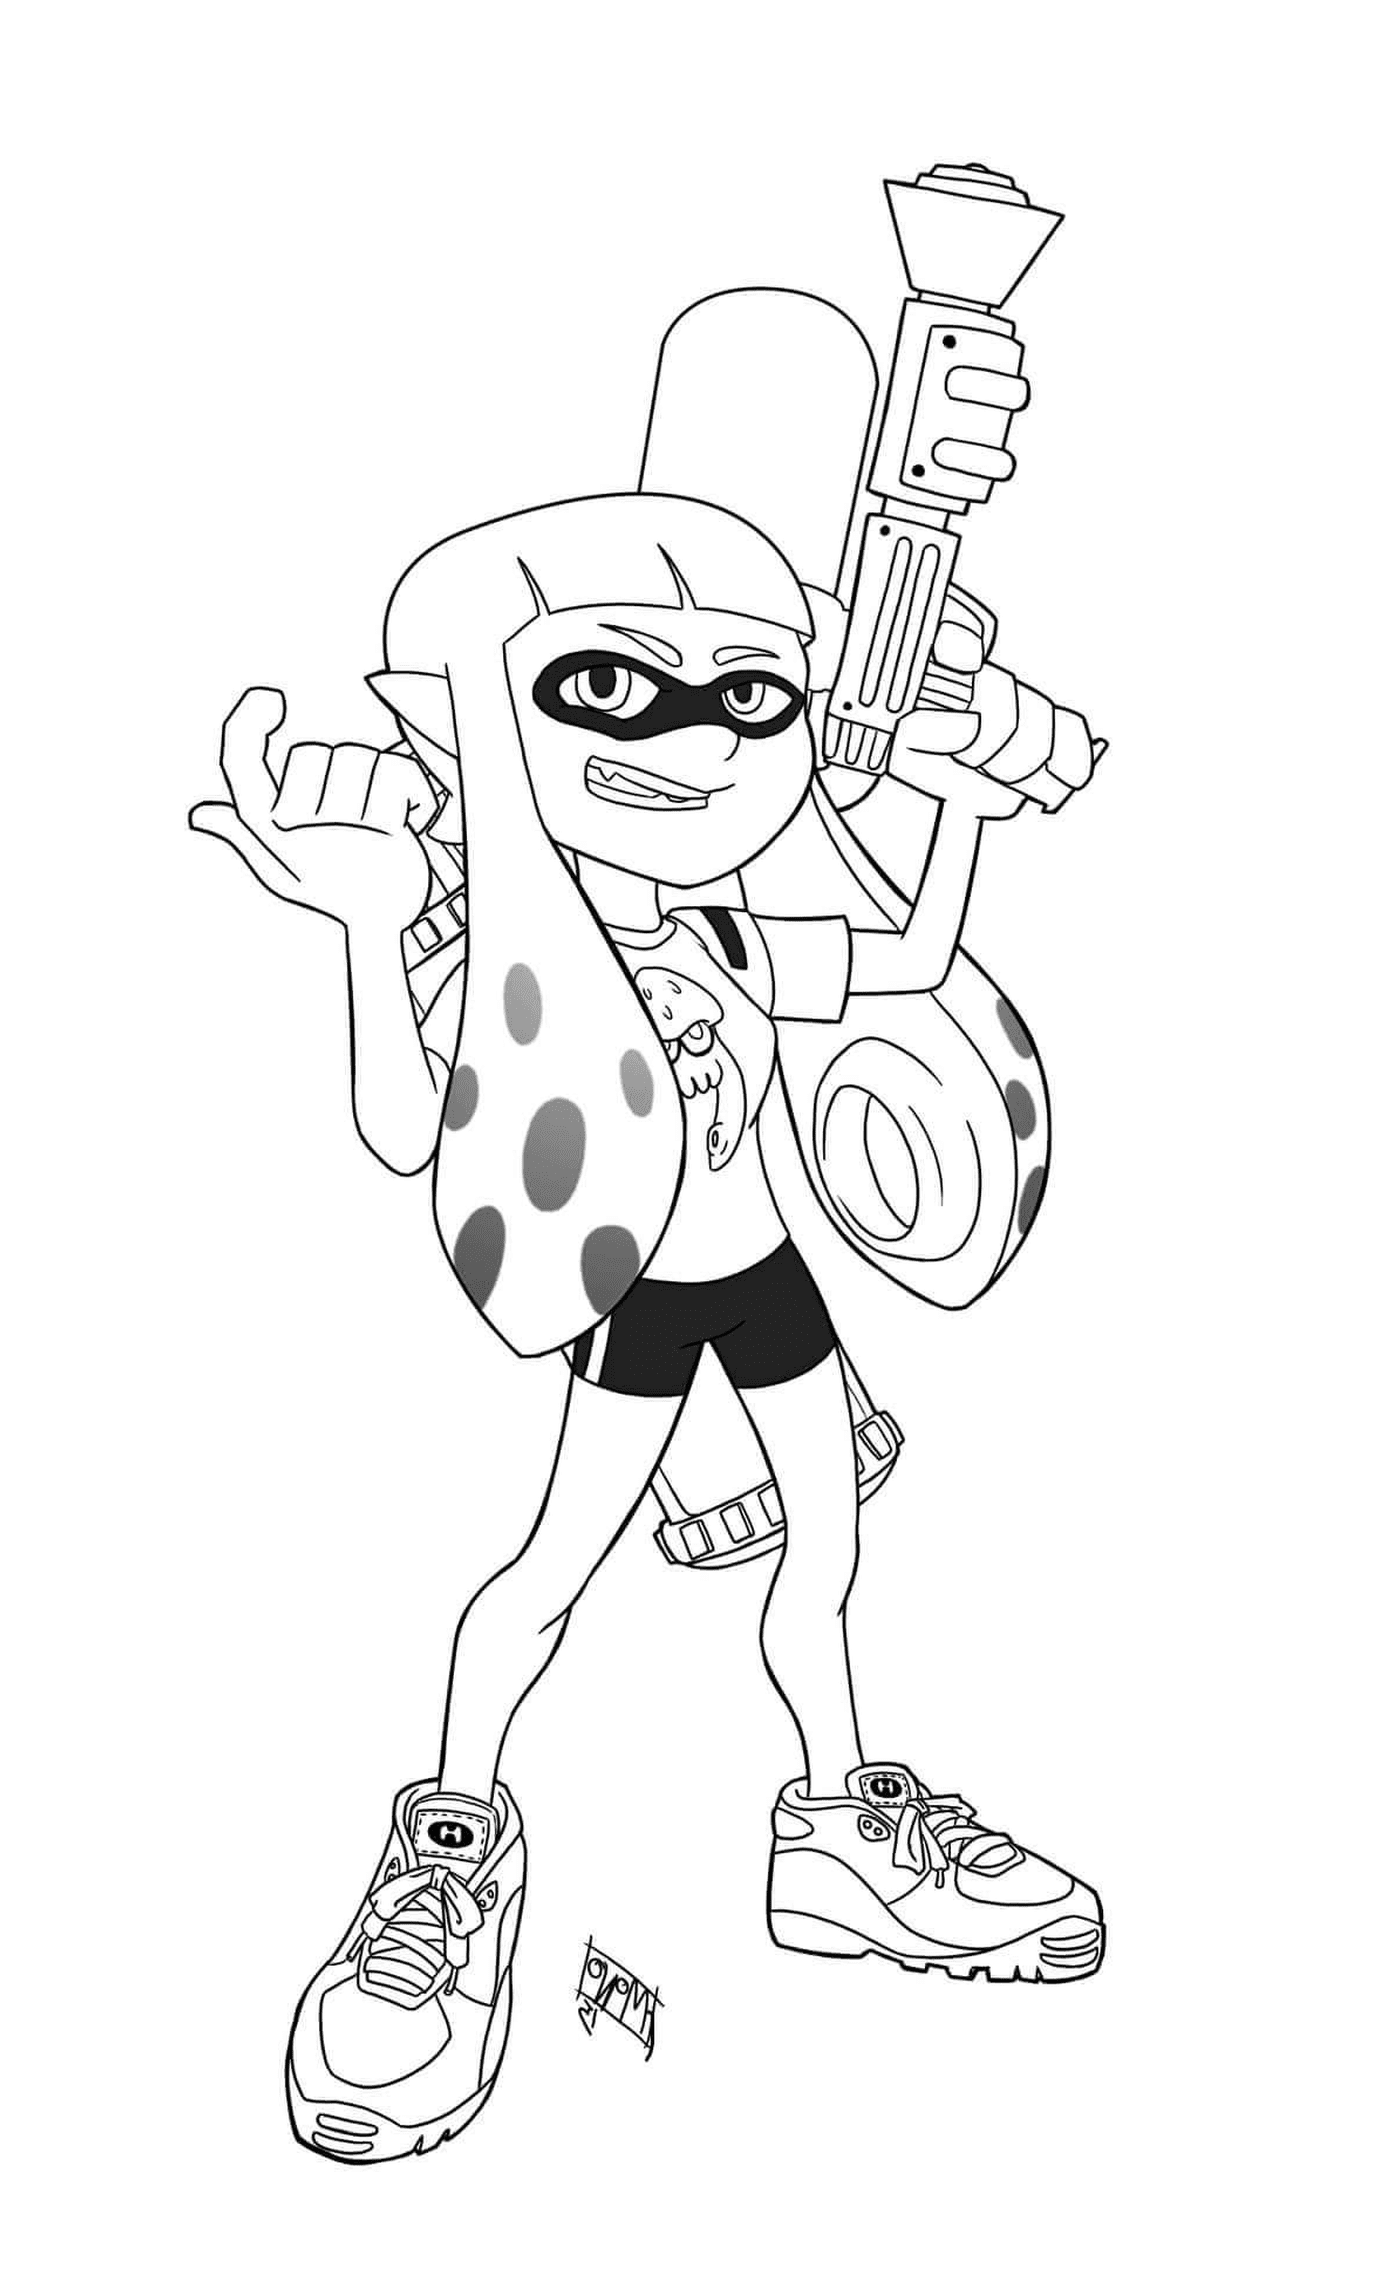  Inklings can alternate between humanoid form and squid form 